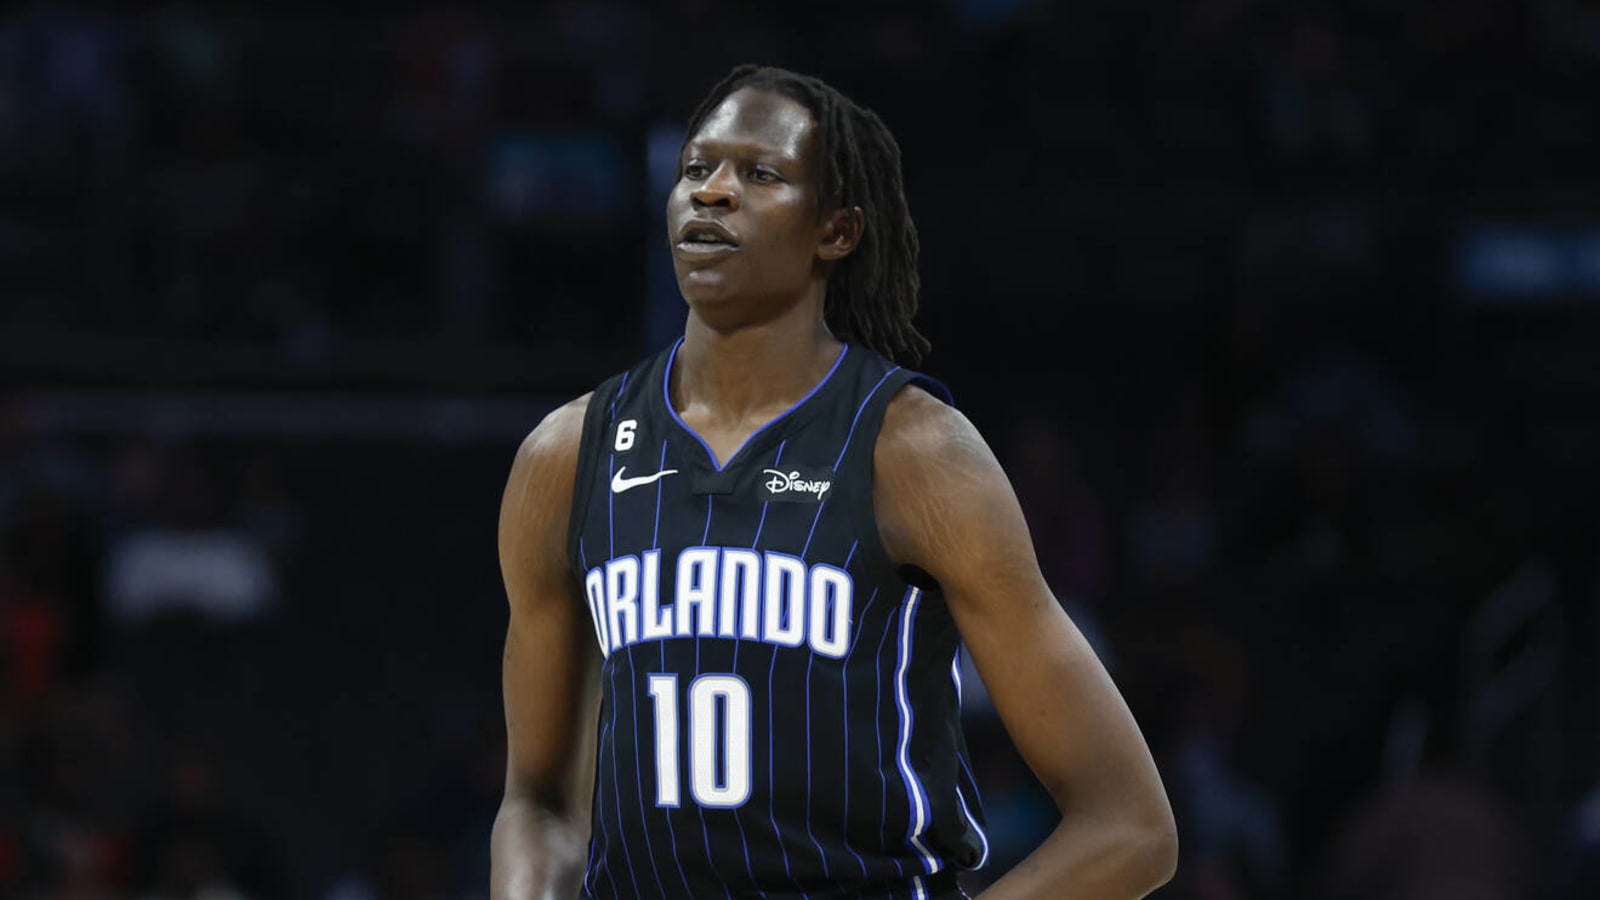 Finding the right fit for Bol Bol after Magic release